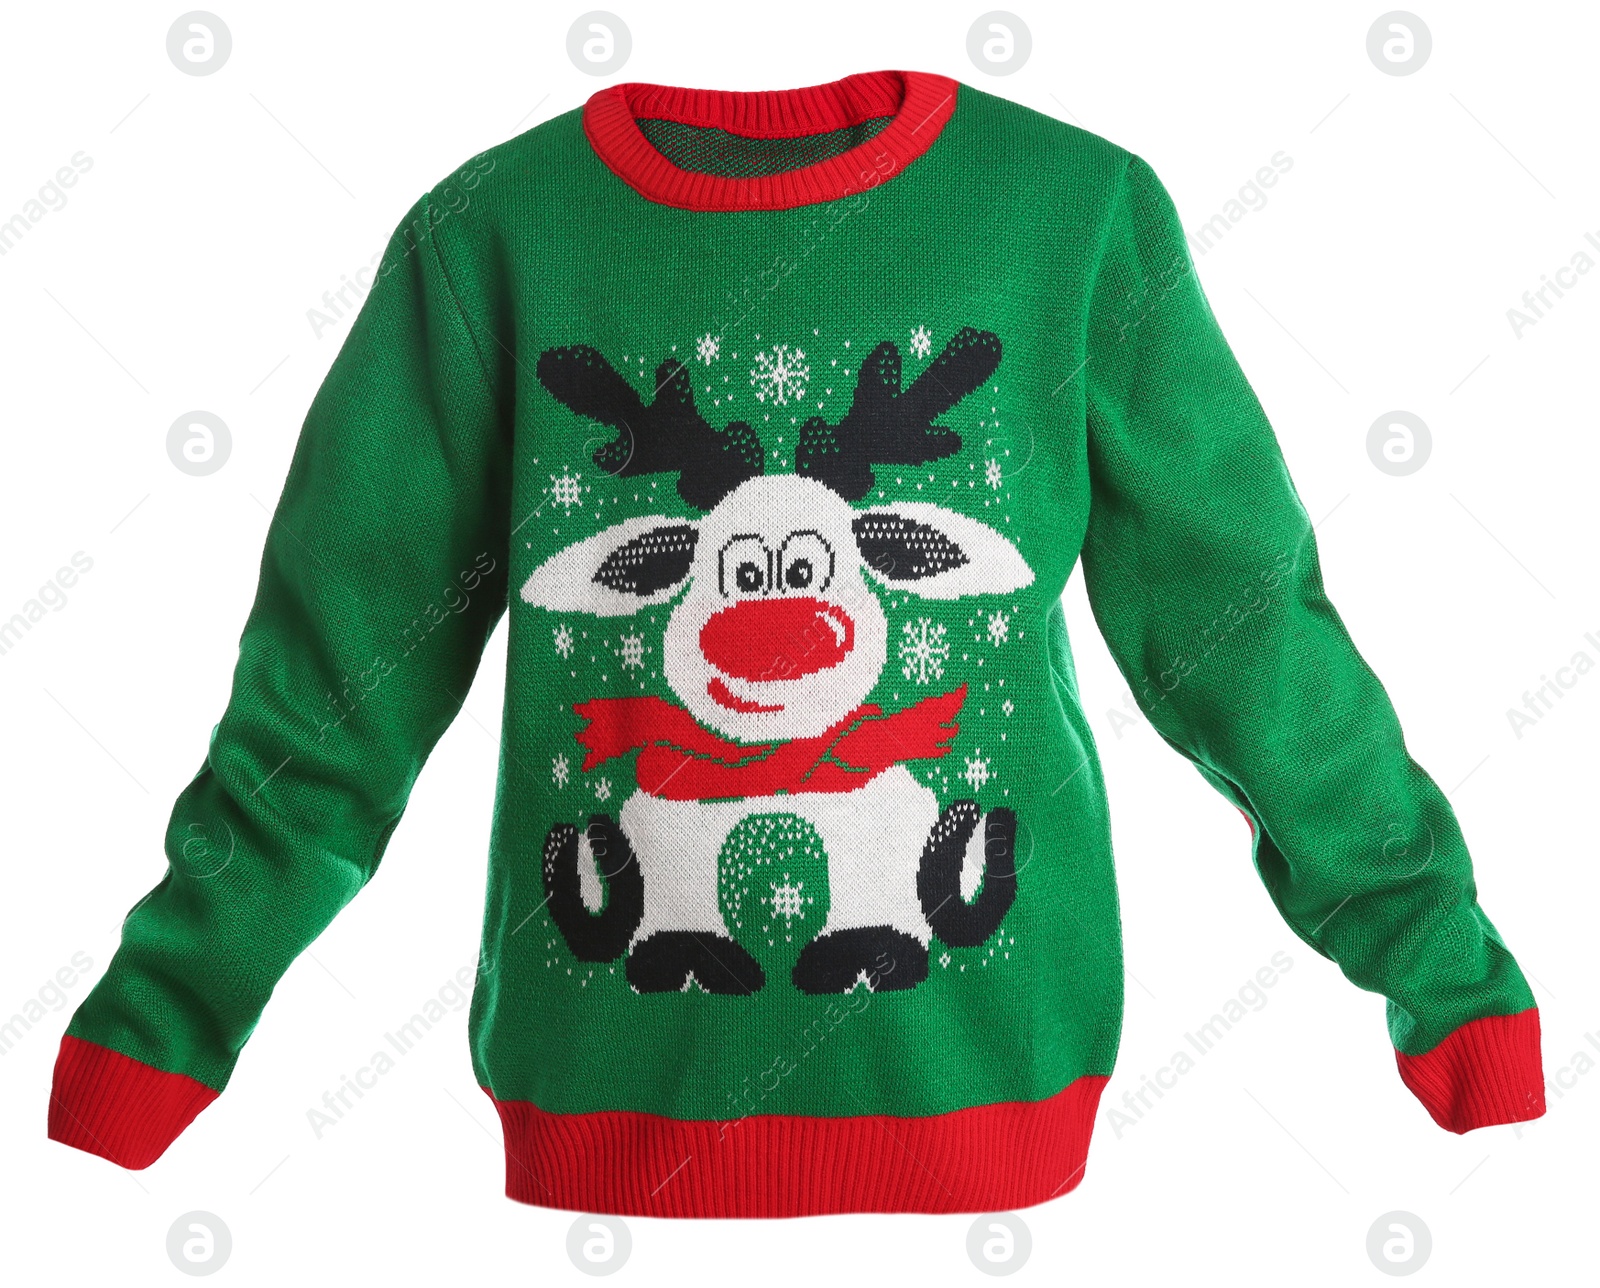 Image of Warm Christmas sweater with reindeer and snowflakes on white background